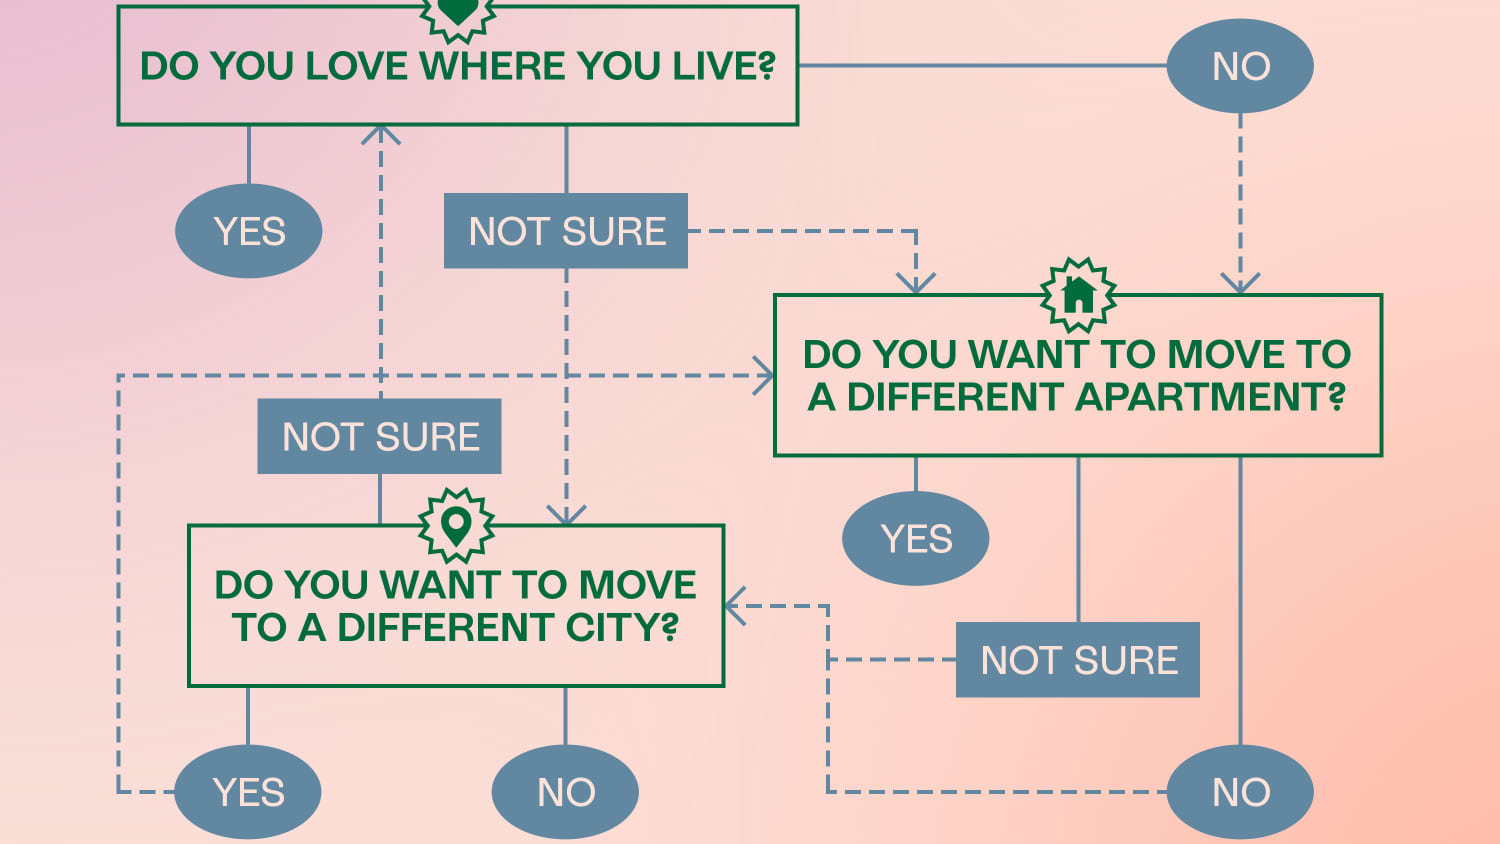 To Move, To Move In, To Move Out, A Move - Qual a diferença?